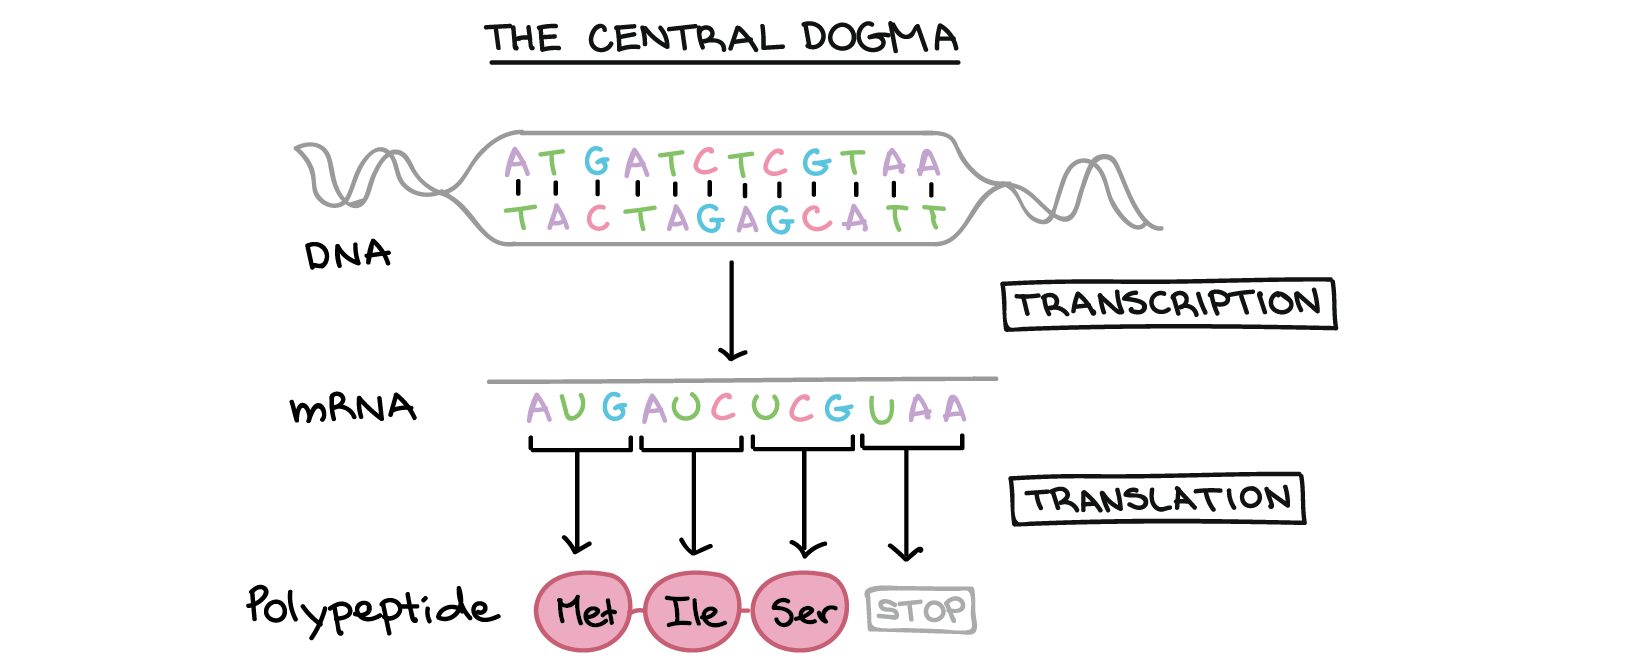 Simplified schematic of central dogma, showing the sequences of the molecules involved. The two strands of DNA have the following sequences: 5'-ATGATCTCGTAA-3' 3'-TACTAGAGCATT-5' Transcription of one of the strands of DNA produces an mRNA that nearly matches the other strand of DNA in sequence. However, due to a biochemical difference between DNA and RNA, the Ts of DNA are replaced with Us in the mRNA. The mRNA sequence is: 5'-AUGAUCUCGUAA-5' Translation involves reading the mRNA nucleotides in groups of three; each group specifies an amino acid (or provides a stop signal indicating that translation is finished). 3'-AUG AUC UCG UAA-5' AUG $\rightarrow$ Methionine AUC $\rightarrow$ Isoleucine UCG $\rightarrow$ Serine UAA $\rightarrow$ "Stop" Polypeptide sequence: (N-terminus) Methionine-Isoleucine-Serine (C-terminus) 